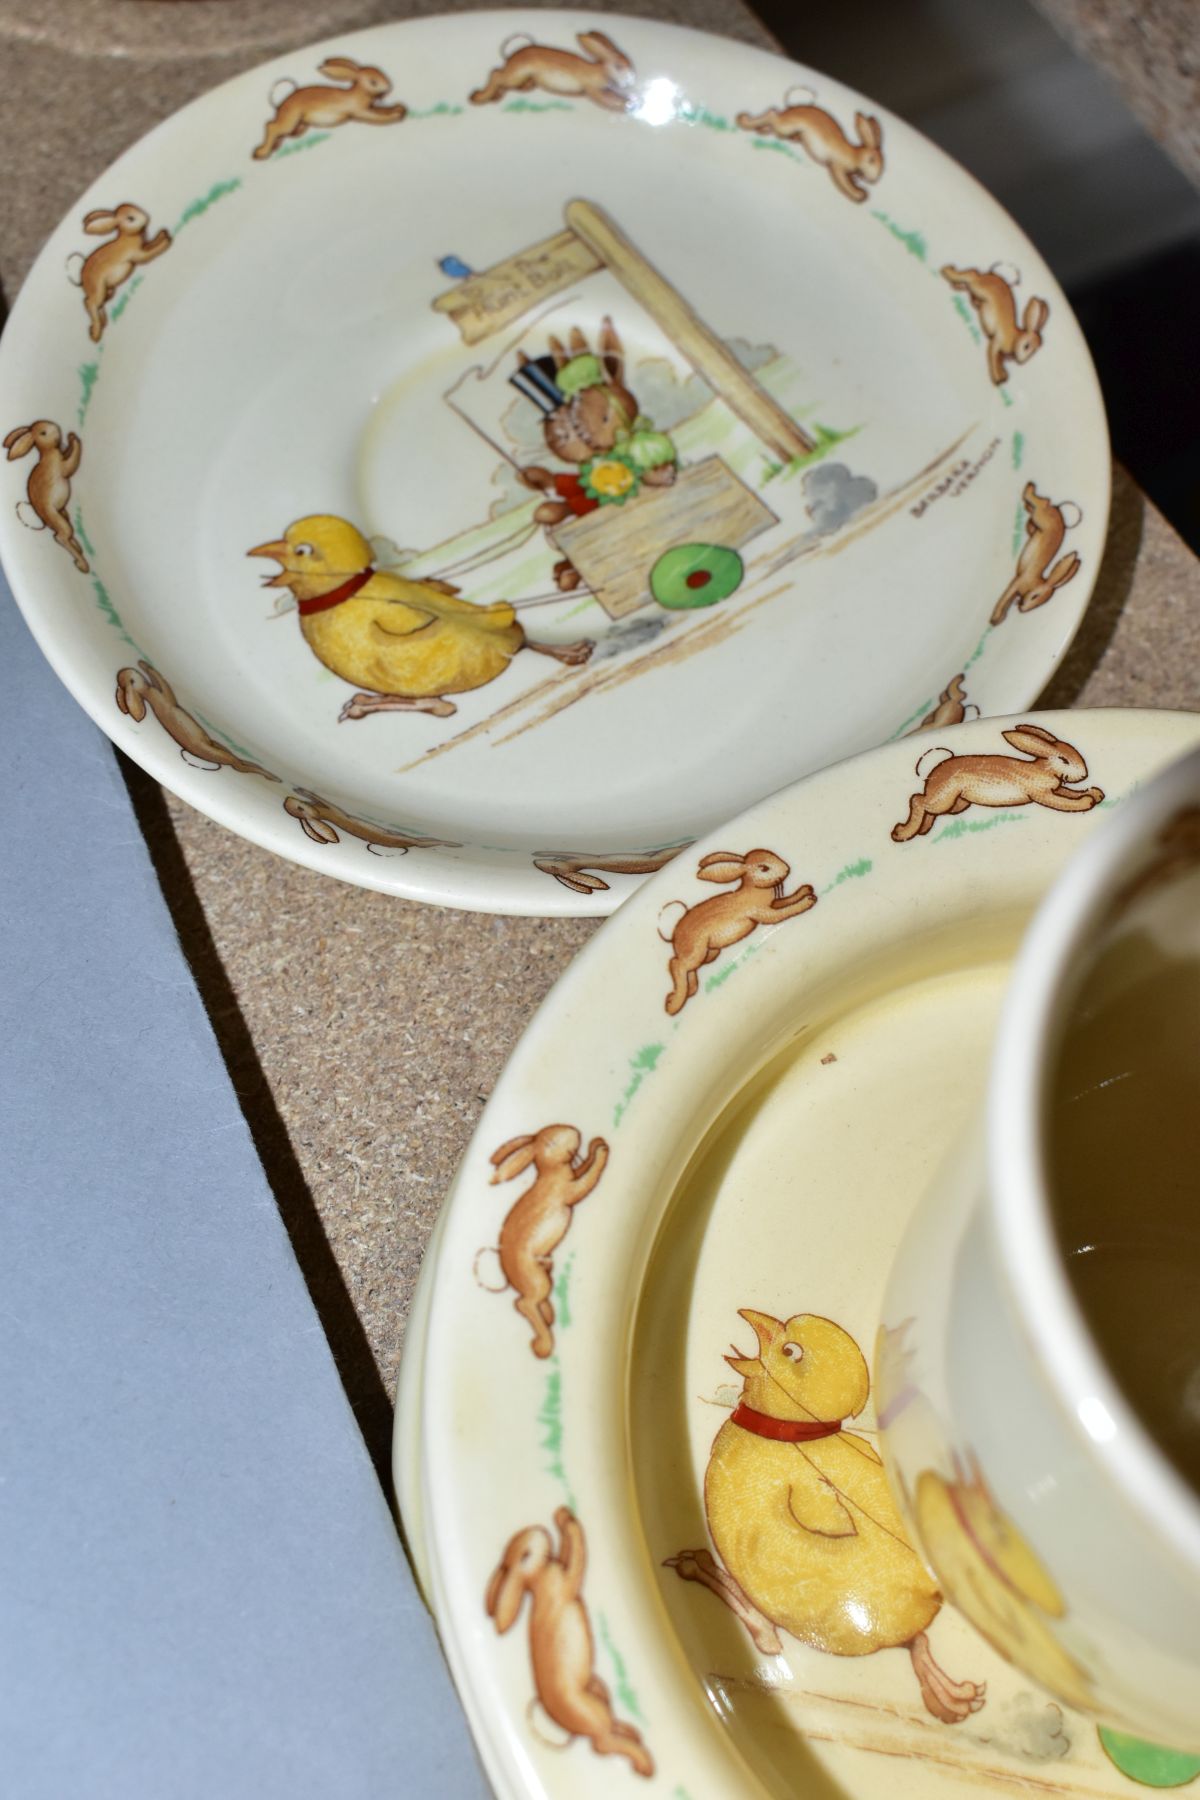 SIX PIECES OF ROYAL DOULTON BUNNYKINS EARTHENWARE TABLES WARES OF CHICKEN PULLING CART, DESIGNED - Image 10 of 10